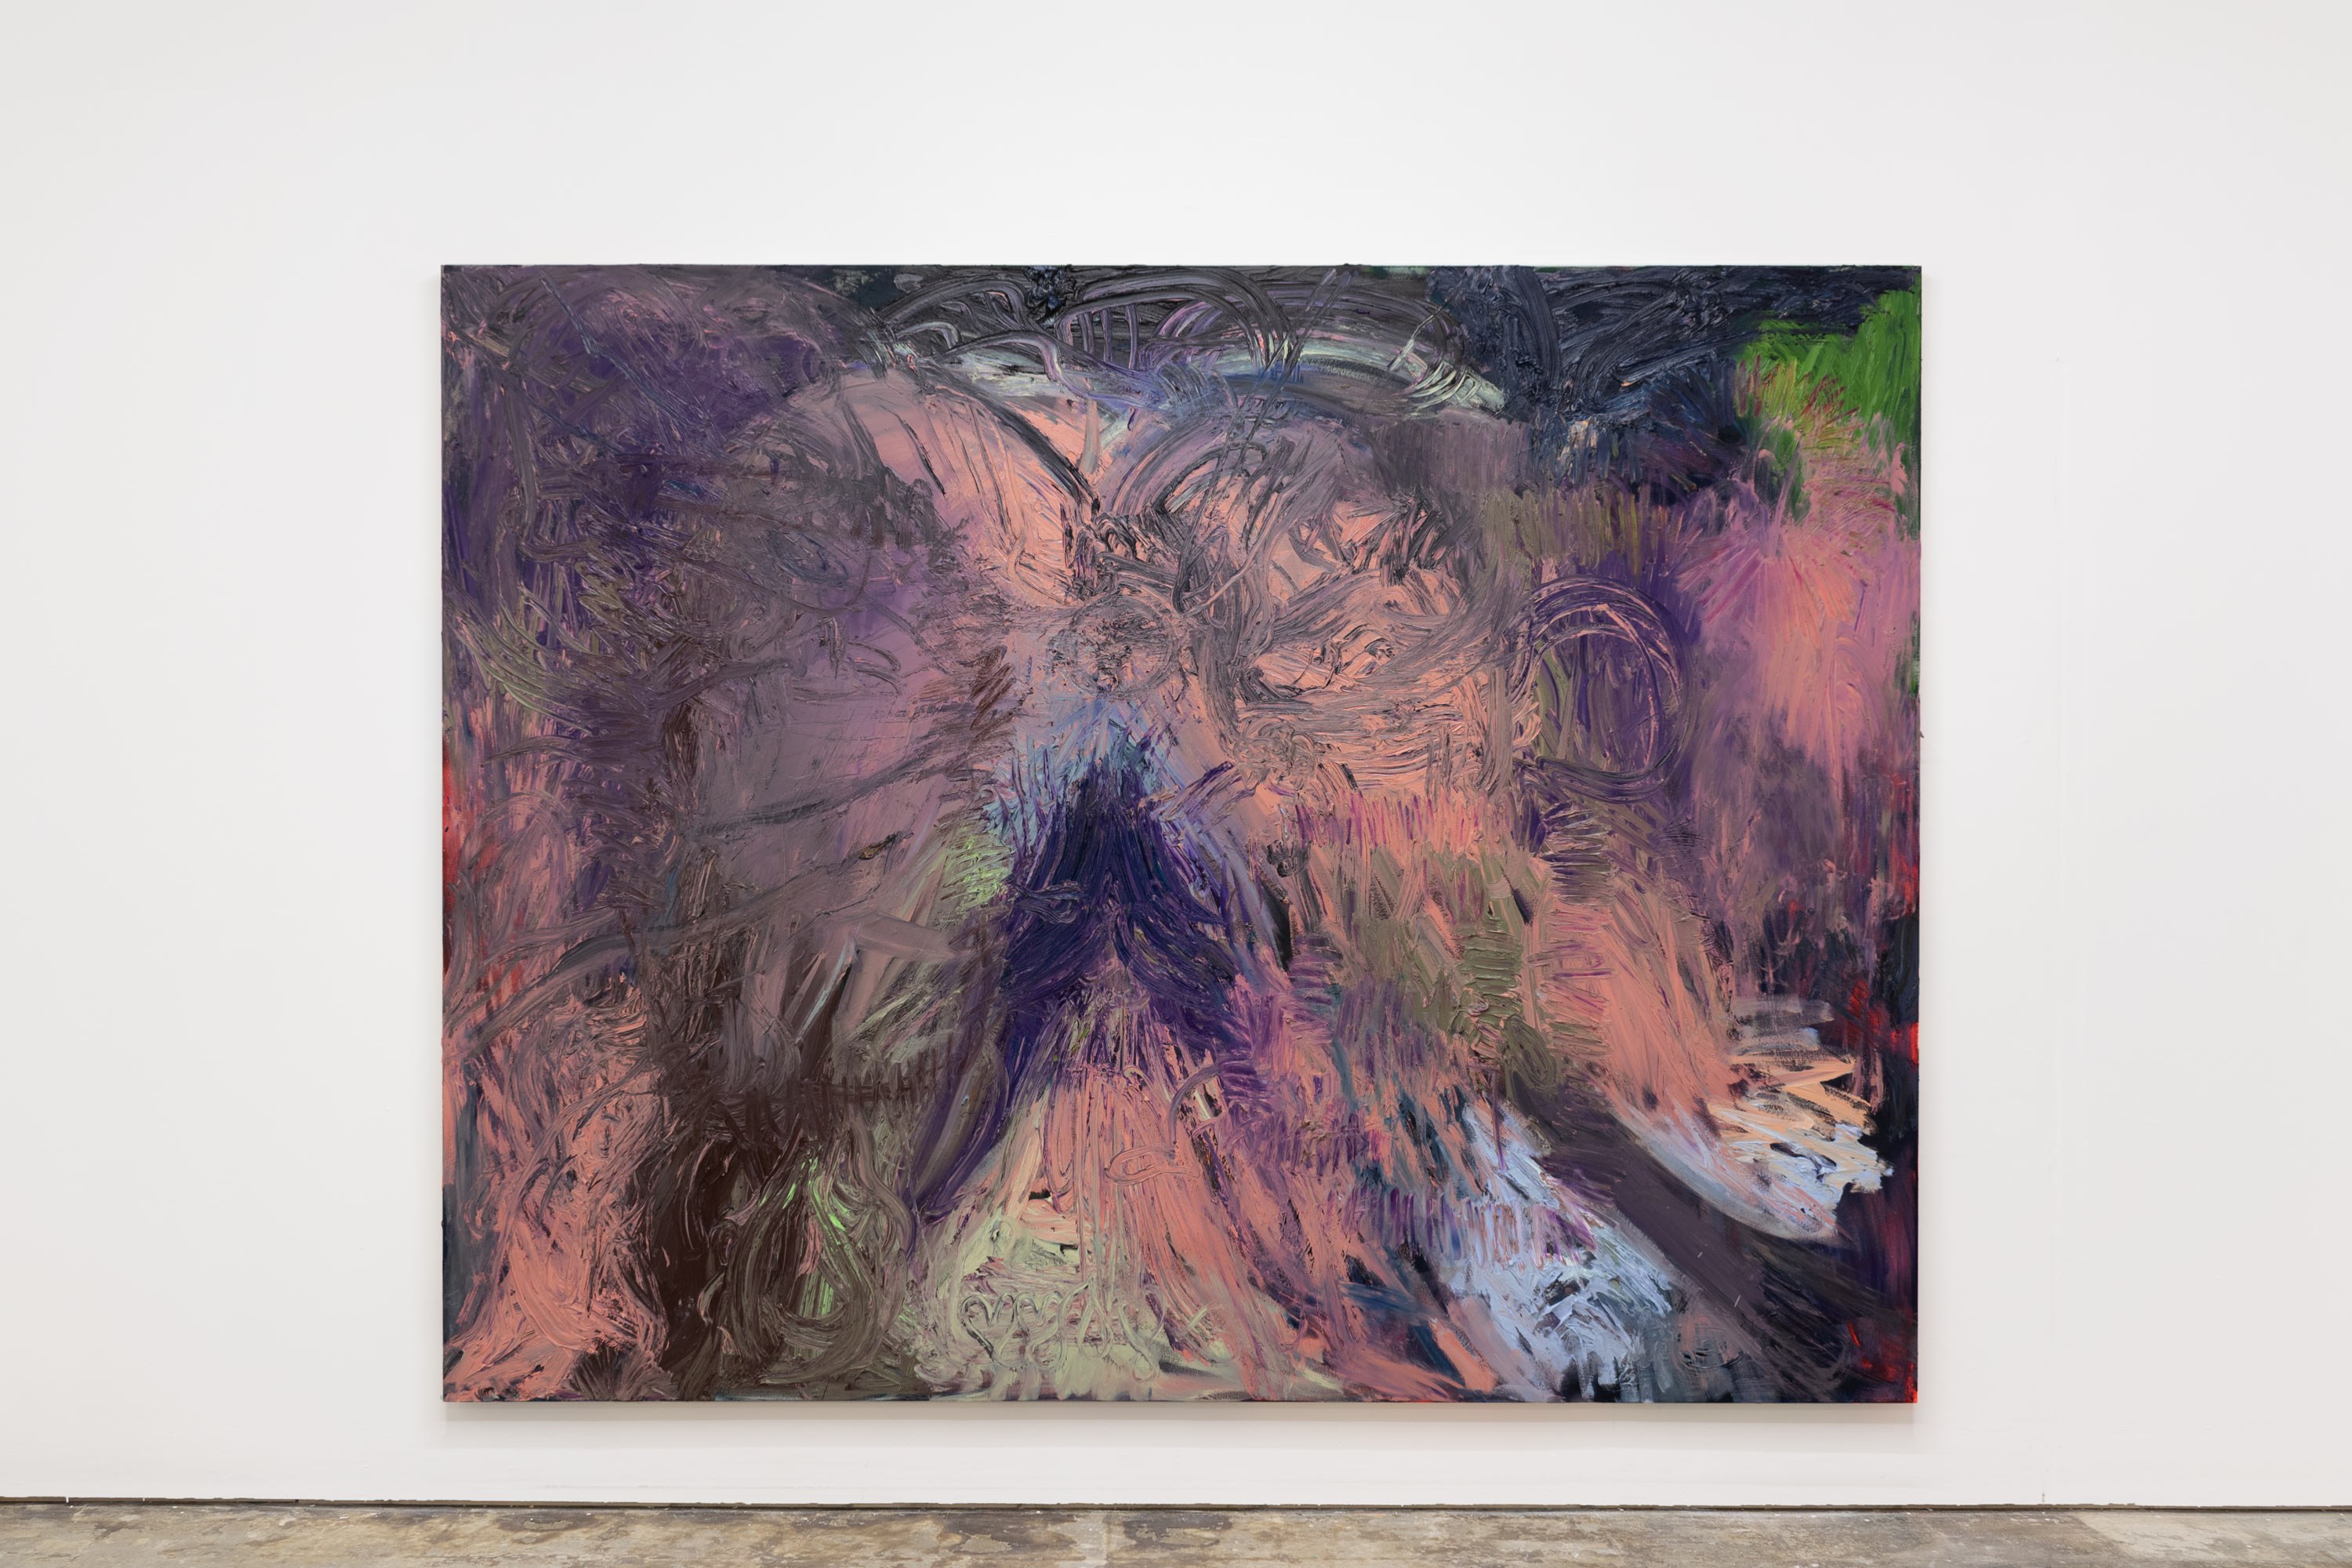 Summit, oil paint, spray paint, oil stick, hot pink pigment and glitter on canvas, 260 x 200cm, 2023 